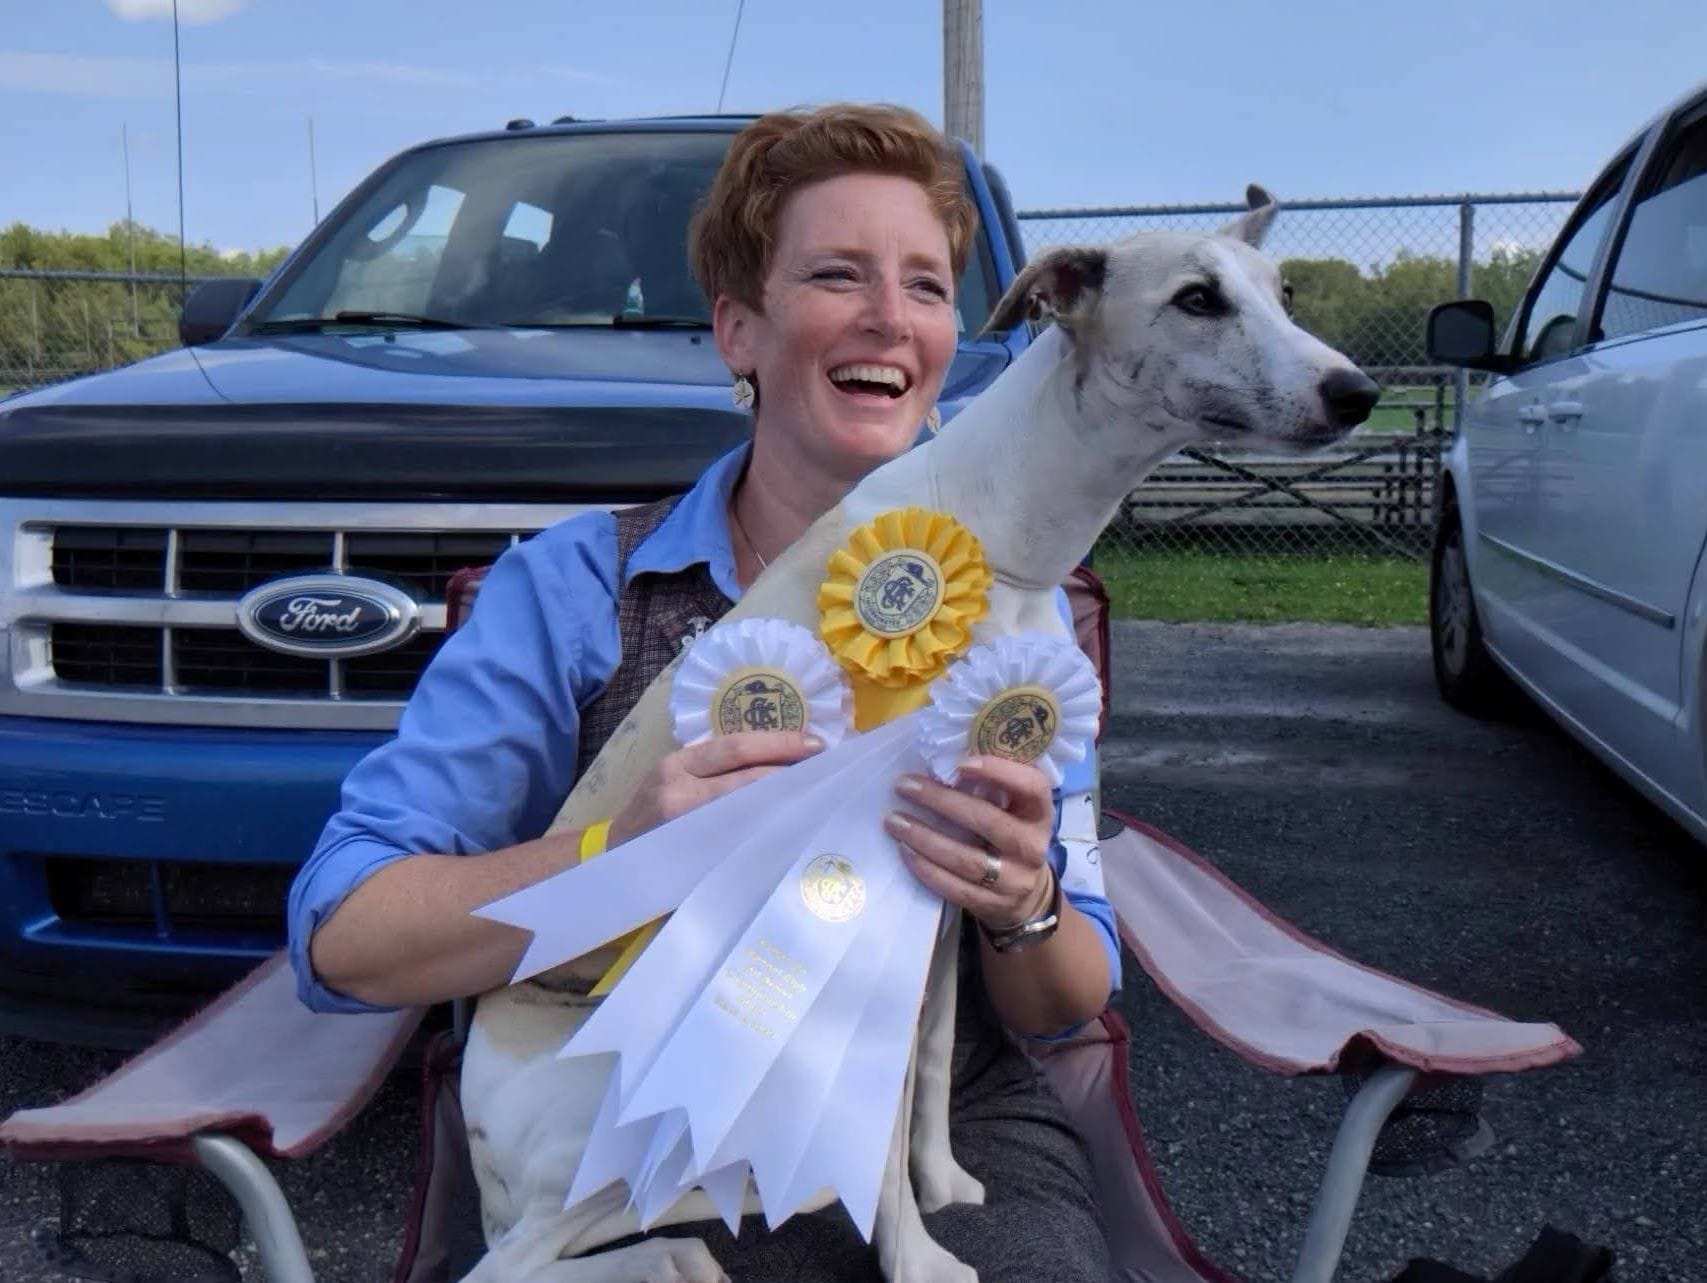 A whippet winning ribbons with a woman